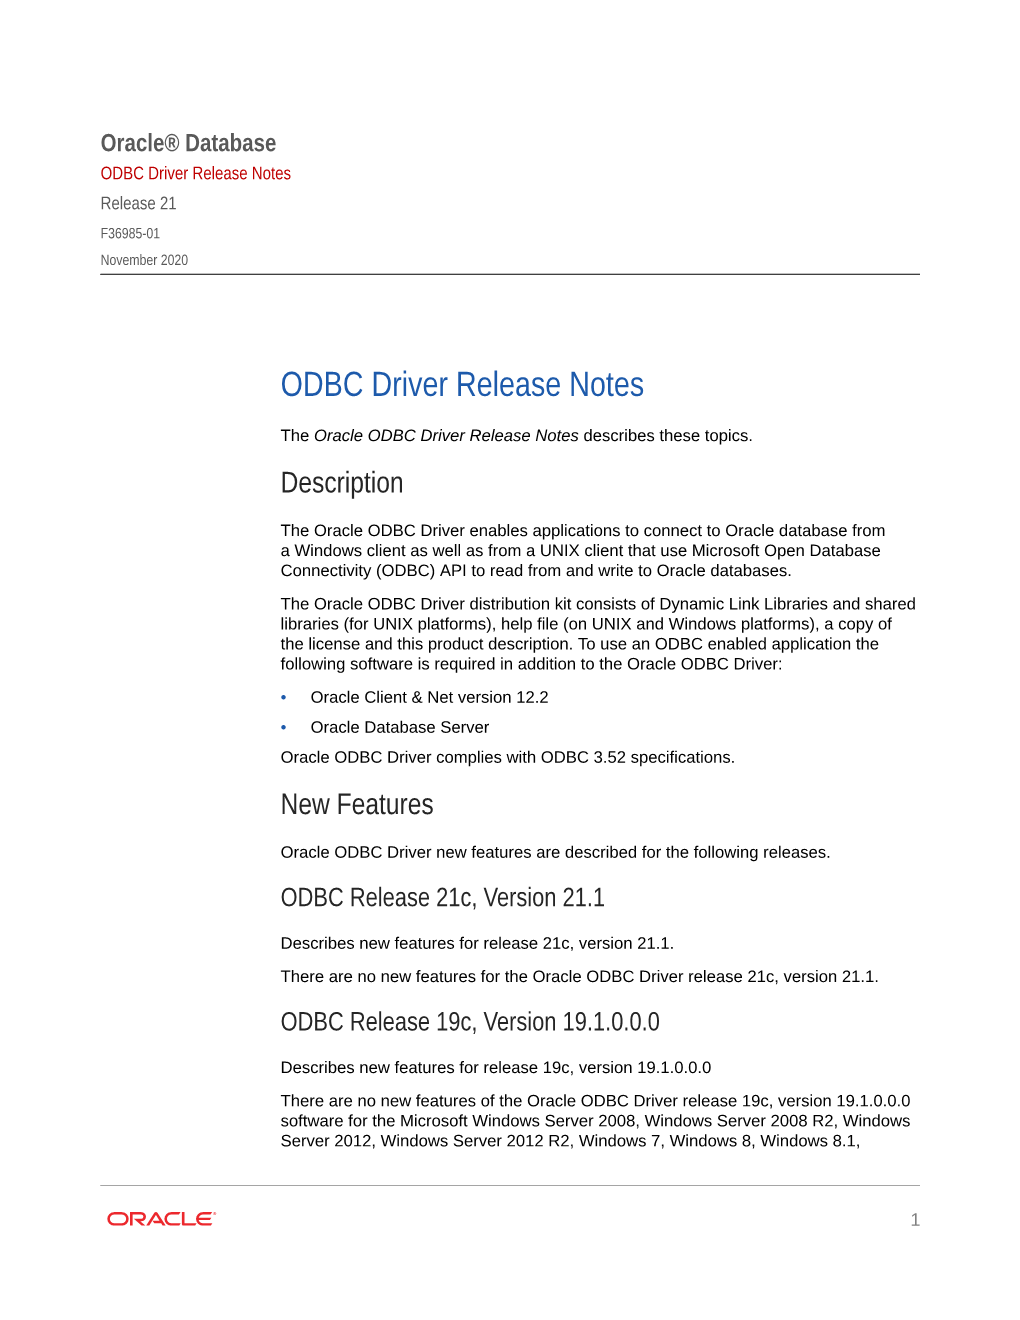 ODBC Driver Release Notes Release 21 F36985-01 November 2020